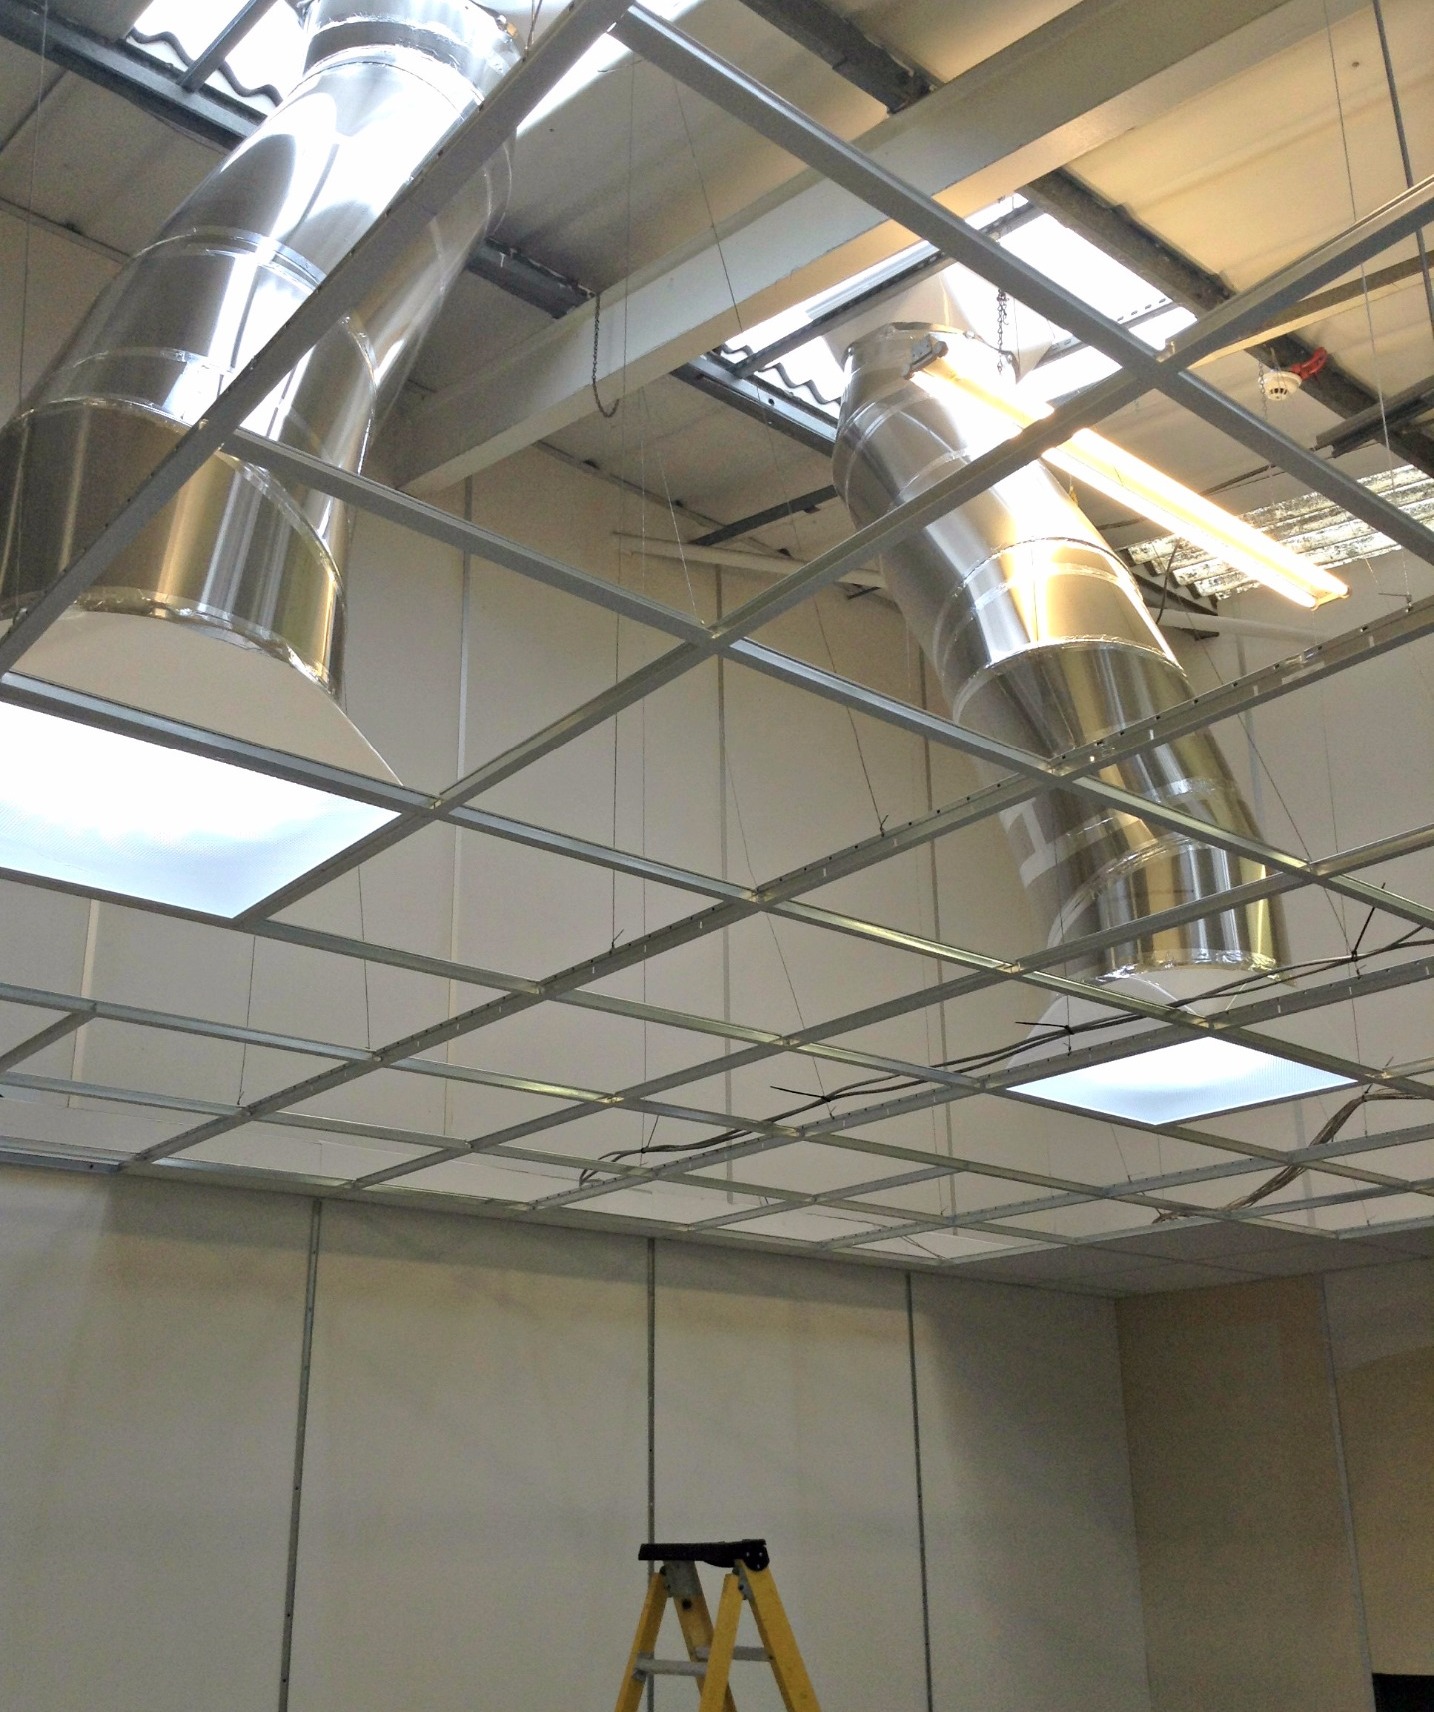 2 daylighting systems installed up to glass in suspended ceiling